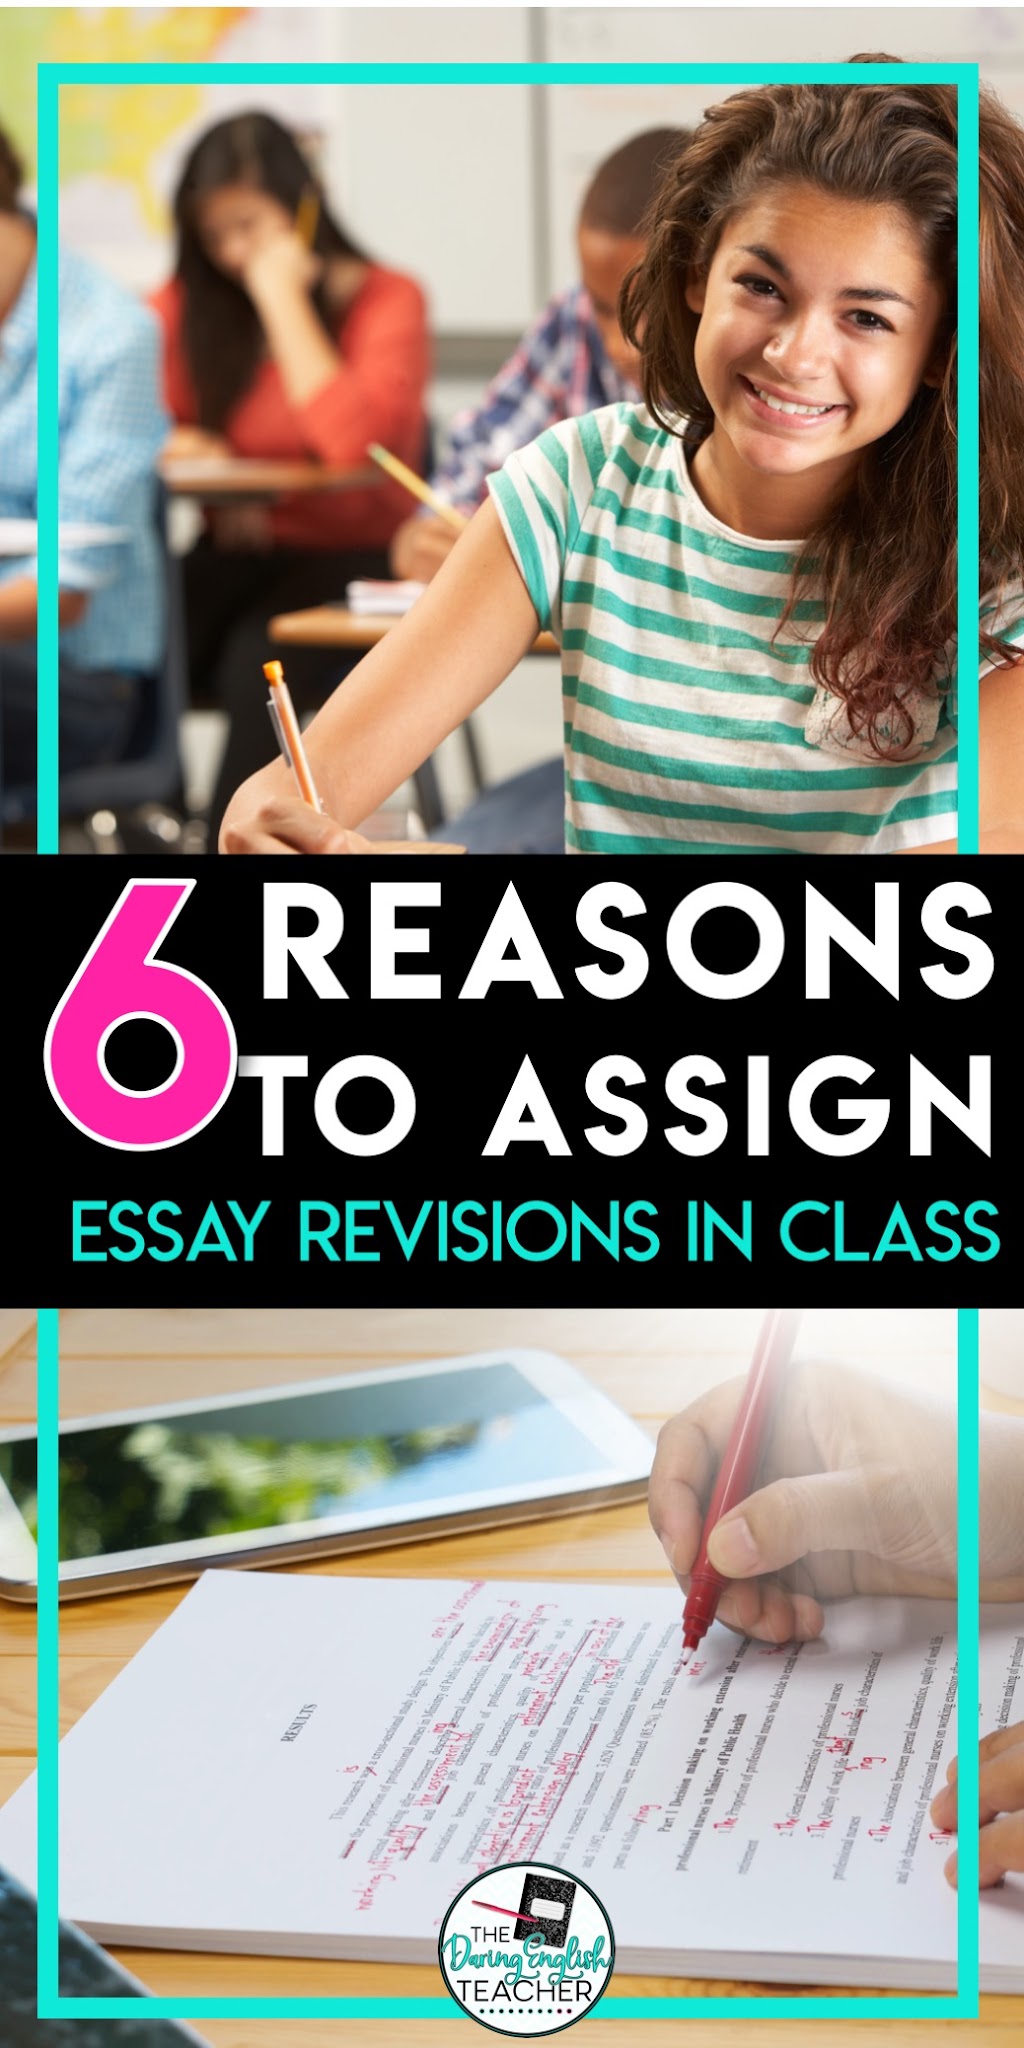 6 Reasons to Assign Essay Revisions